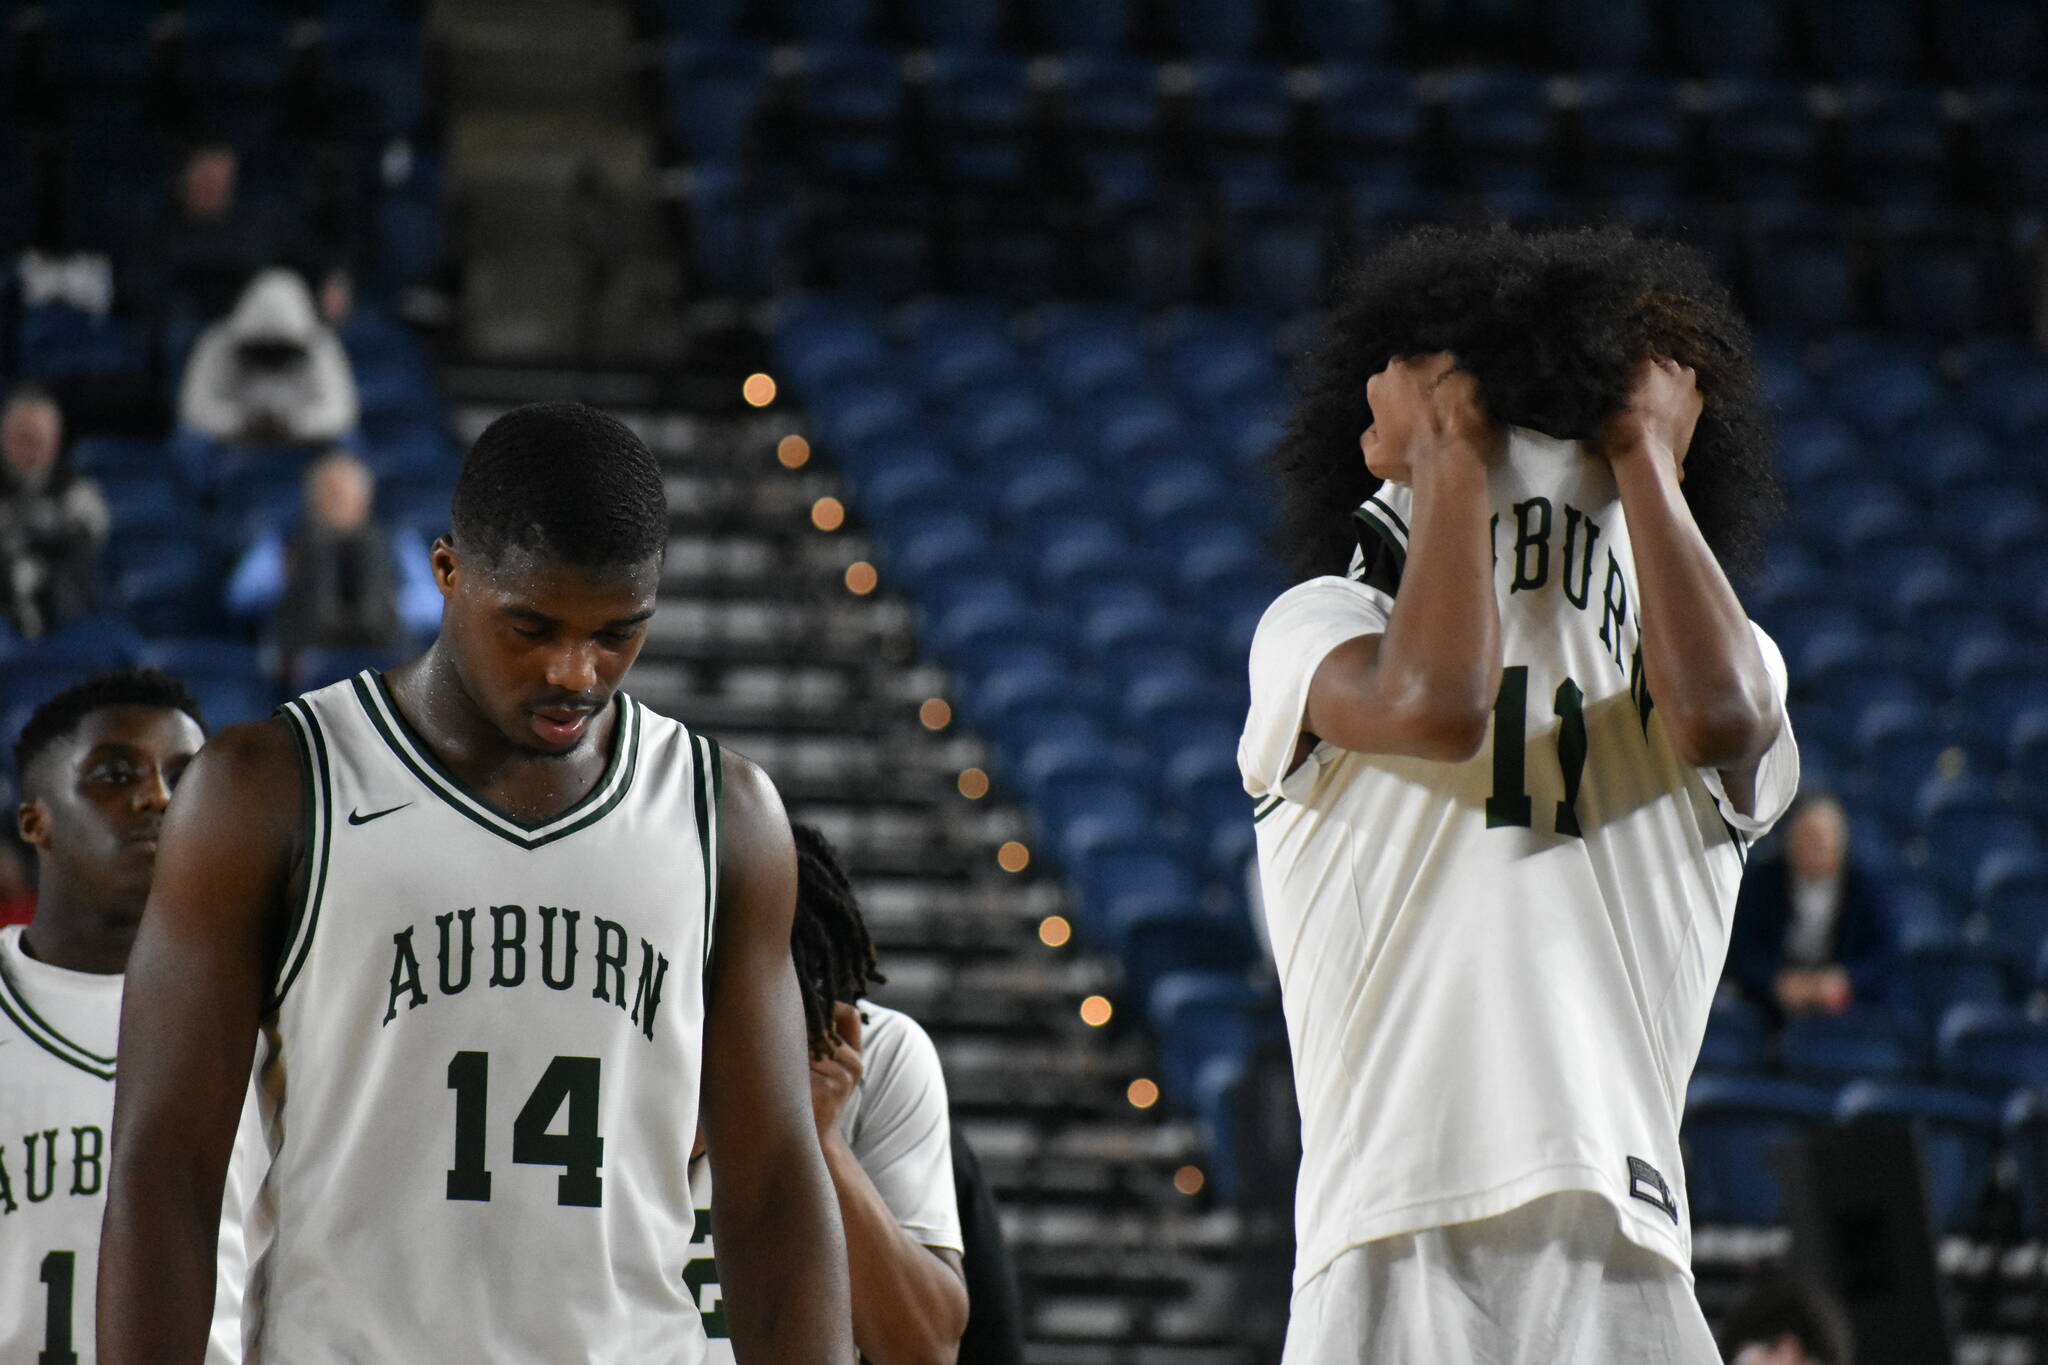 Luvens Valcin and Daniel Johnson walk back to the Auburn bench after being taken down by Lincoln. Ben Ray / The Reporter